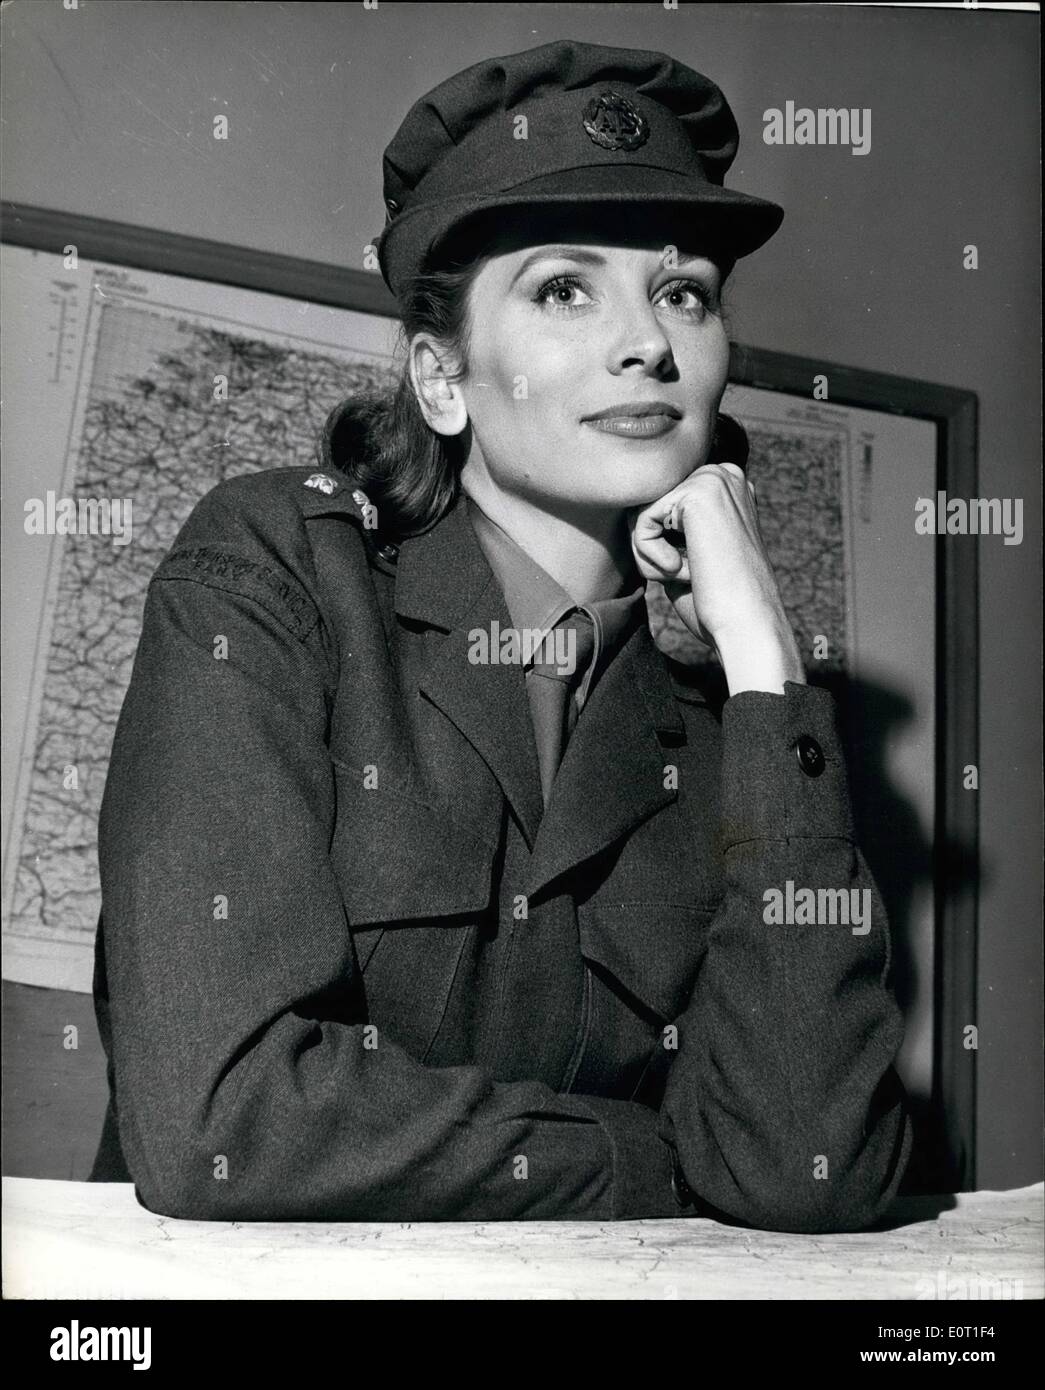 Jun. 29, 1960 - 29-6-60 Suzy Parker as A.T.S. Officer for film. American screen star, Suzy Parker is now filming in Destruction Test at Walton on Thames Studios. Suzy, who plays opposite character actor Harry Andrews, takes on the role of a Lieutenant in the A.T.S. The film is based on the book A Small Back Room in Marylebone by Alec Waugh. Photo Shows: Suzy Parker in her A.T.S. uniform on the set yesterday. Stock Photo